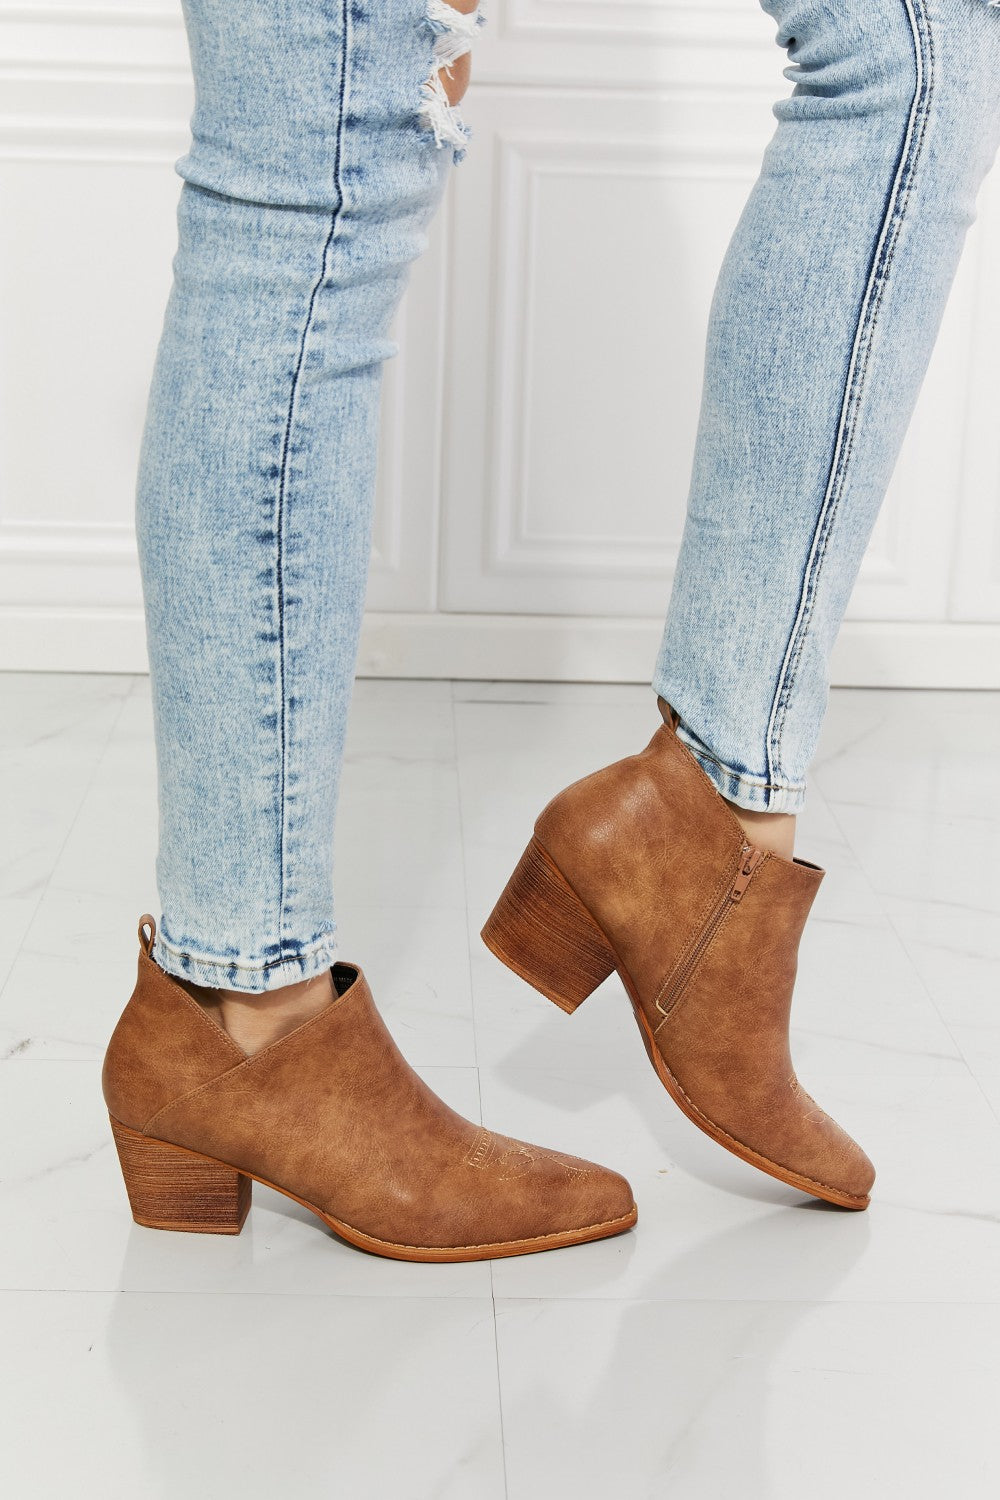 Mmshoes Trust Yourself Embroidered Crossover Cowboy Bootie In Caramel